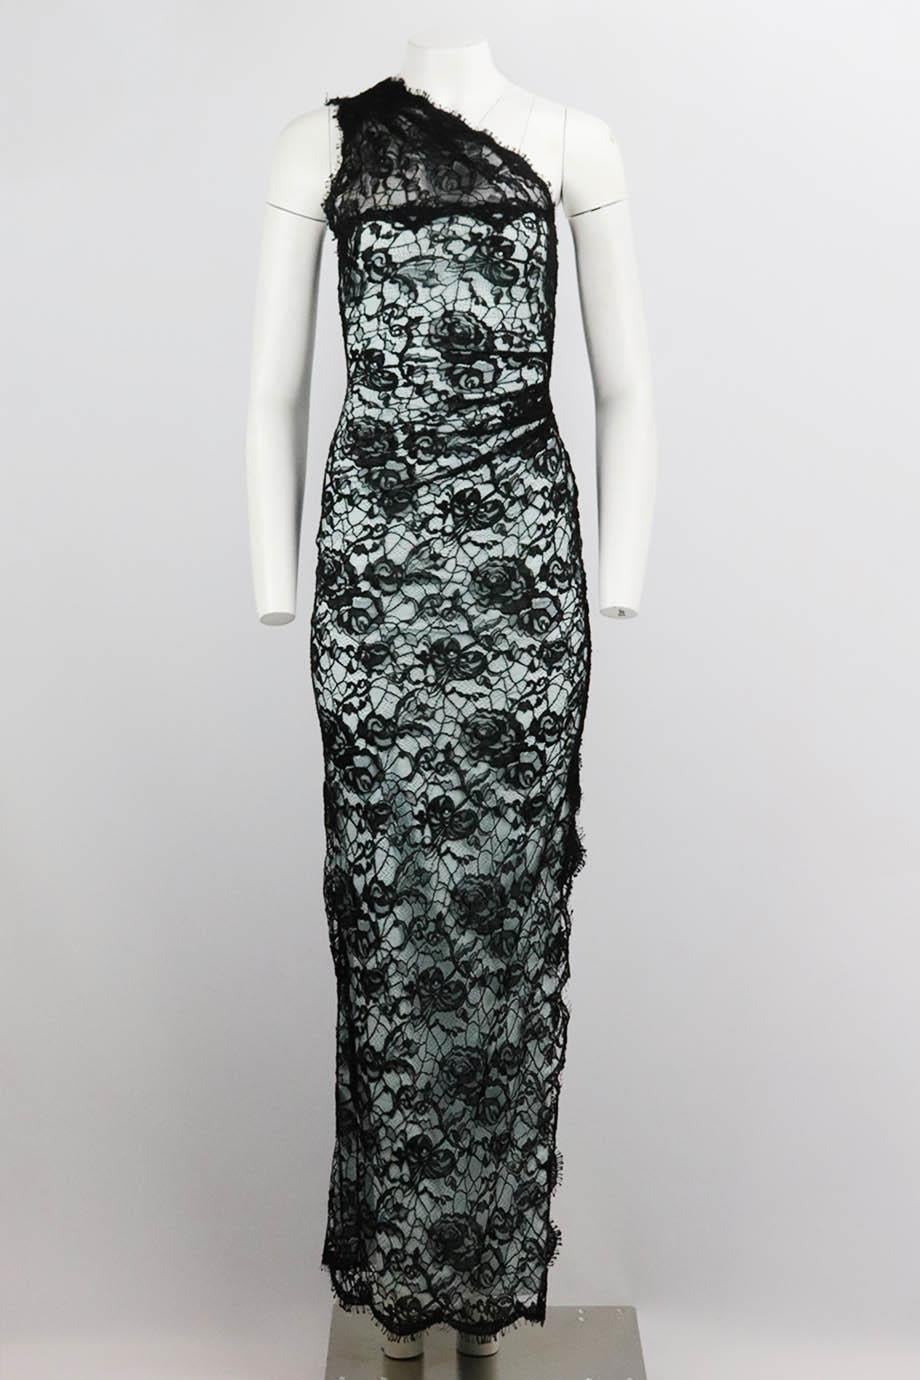 Emilio Pucci one shoulder lace and silk satin maxi dress. Black and blue. Sleeveless, one-shoulder. Zip fastening at side. 67% Viscose, 33% polyamide; lining: 92% silk, 8% elastane. Size: IT 38 (UK 6, US 2, FR 34). Bust: 29 in. Waist: 24 in. Hips: